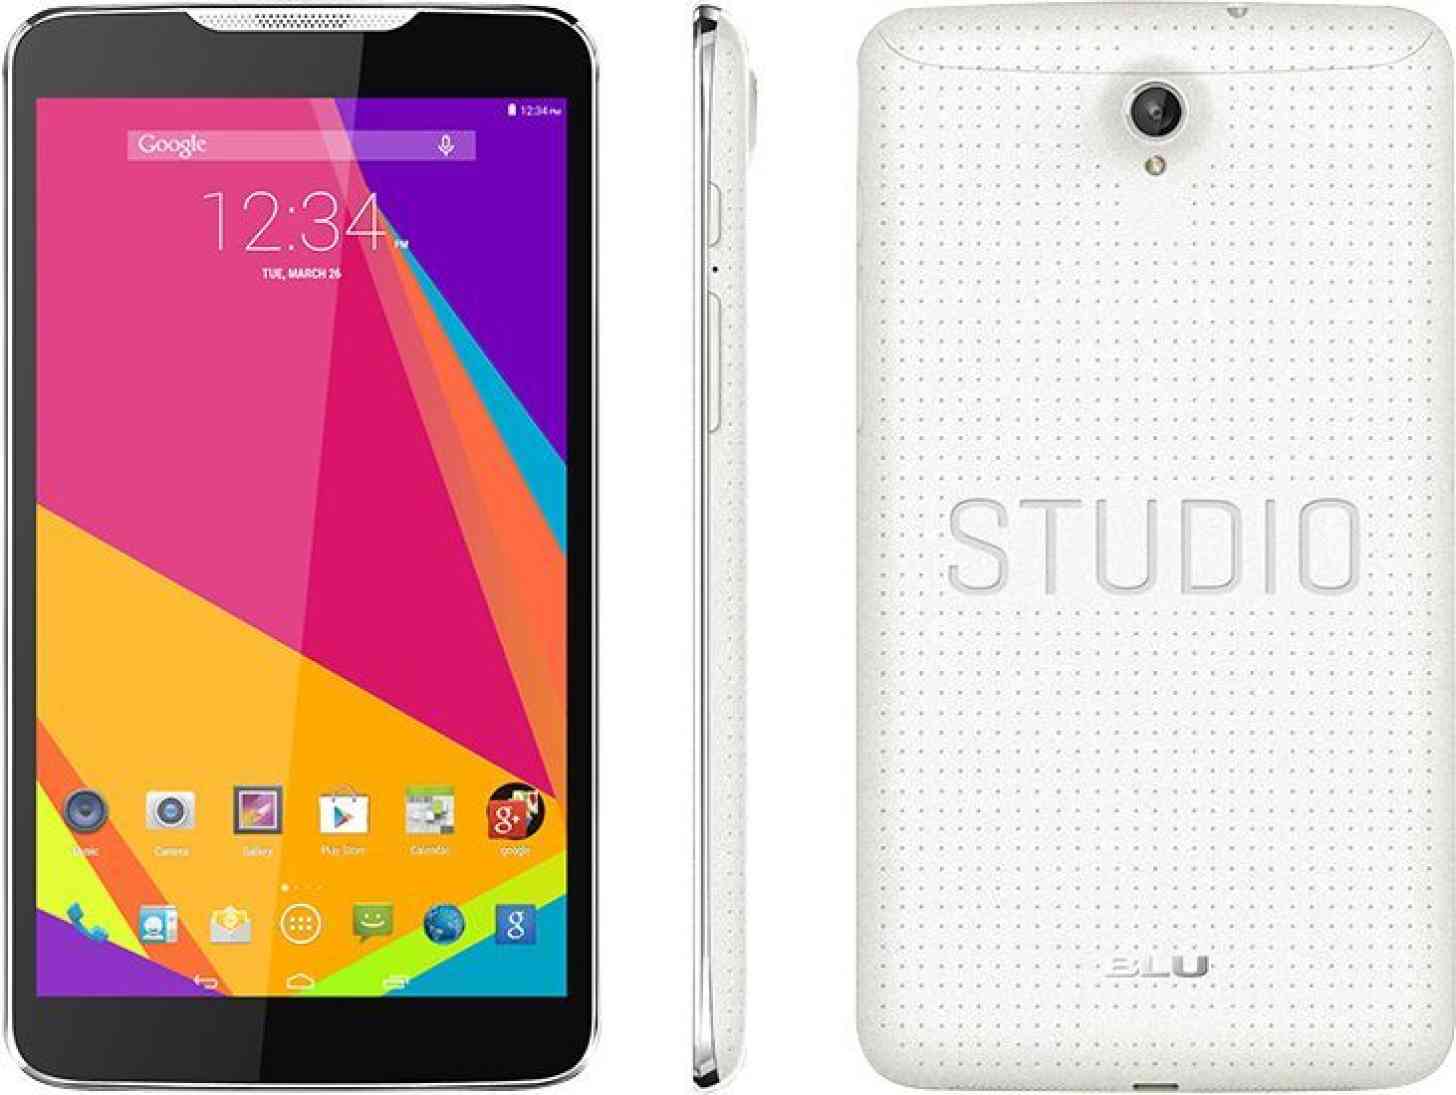 ruilen Doorweekt Medaille BLU Studio 7.0 is a new Android smartphone with a 7-inch screen |  News.Wirefly